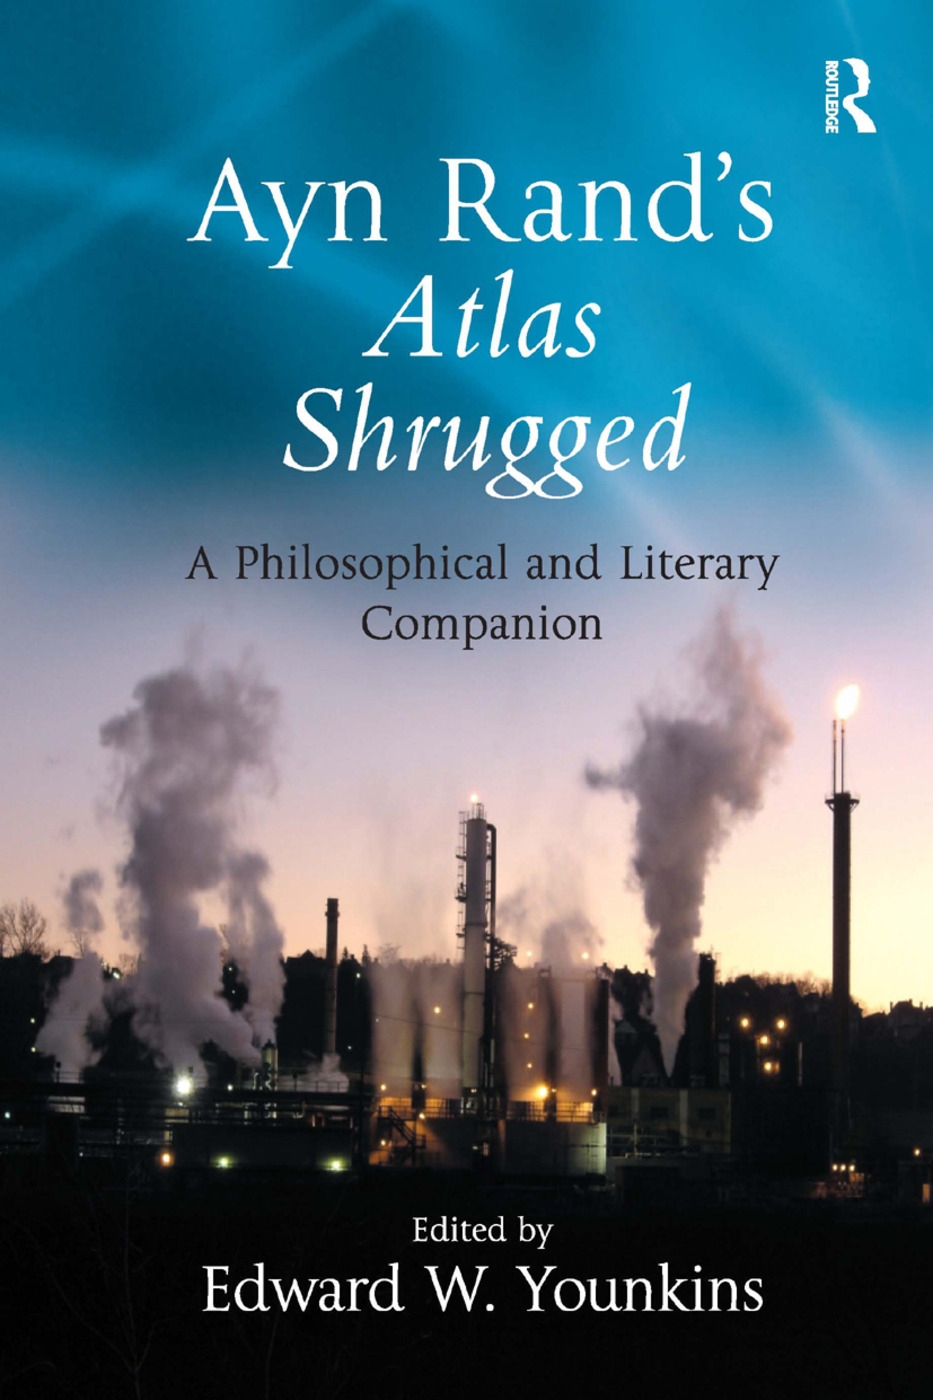 Ayn Rand’s Atlas Shrugged: A Philosophical and Literary Companion